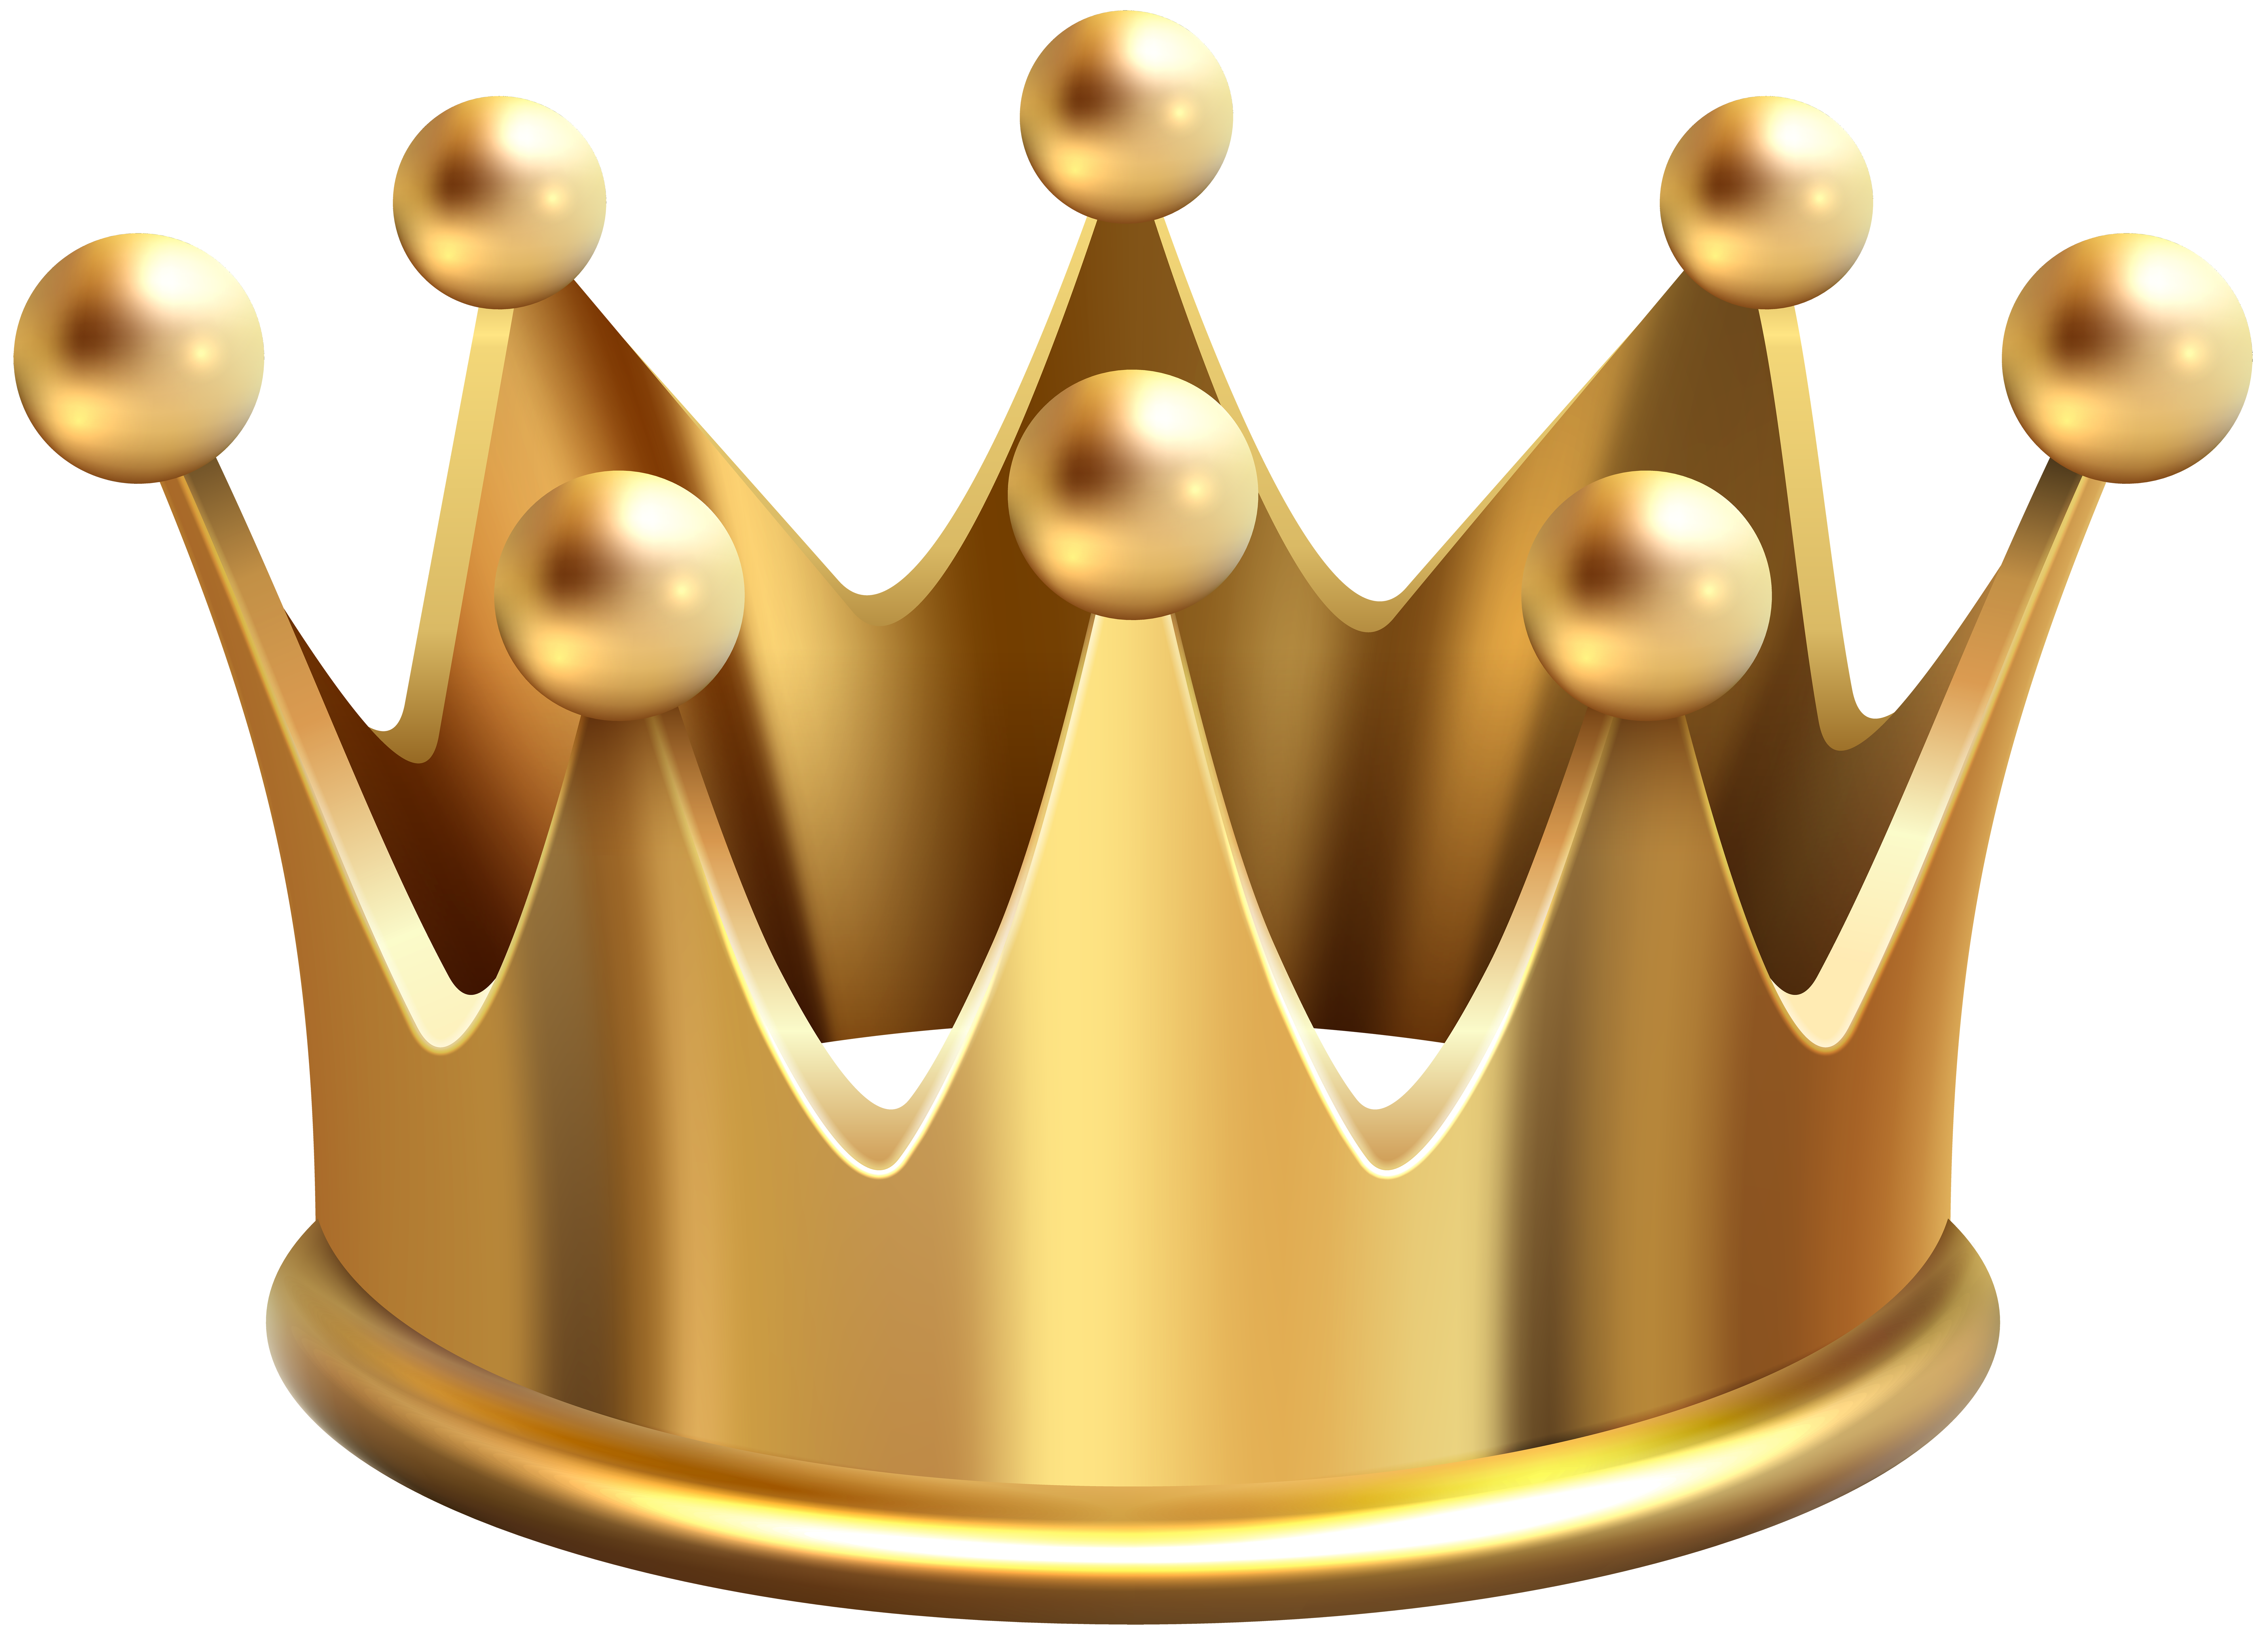 Gold png image gallery. Crown clip art high resolution